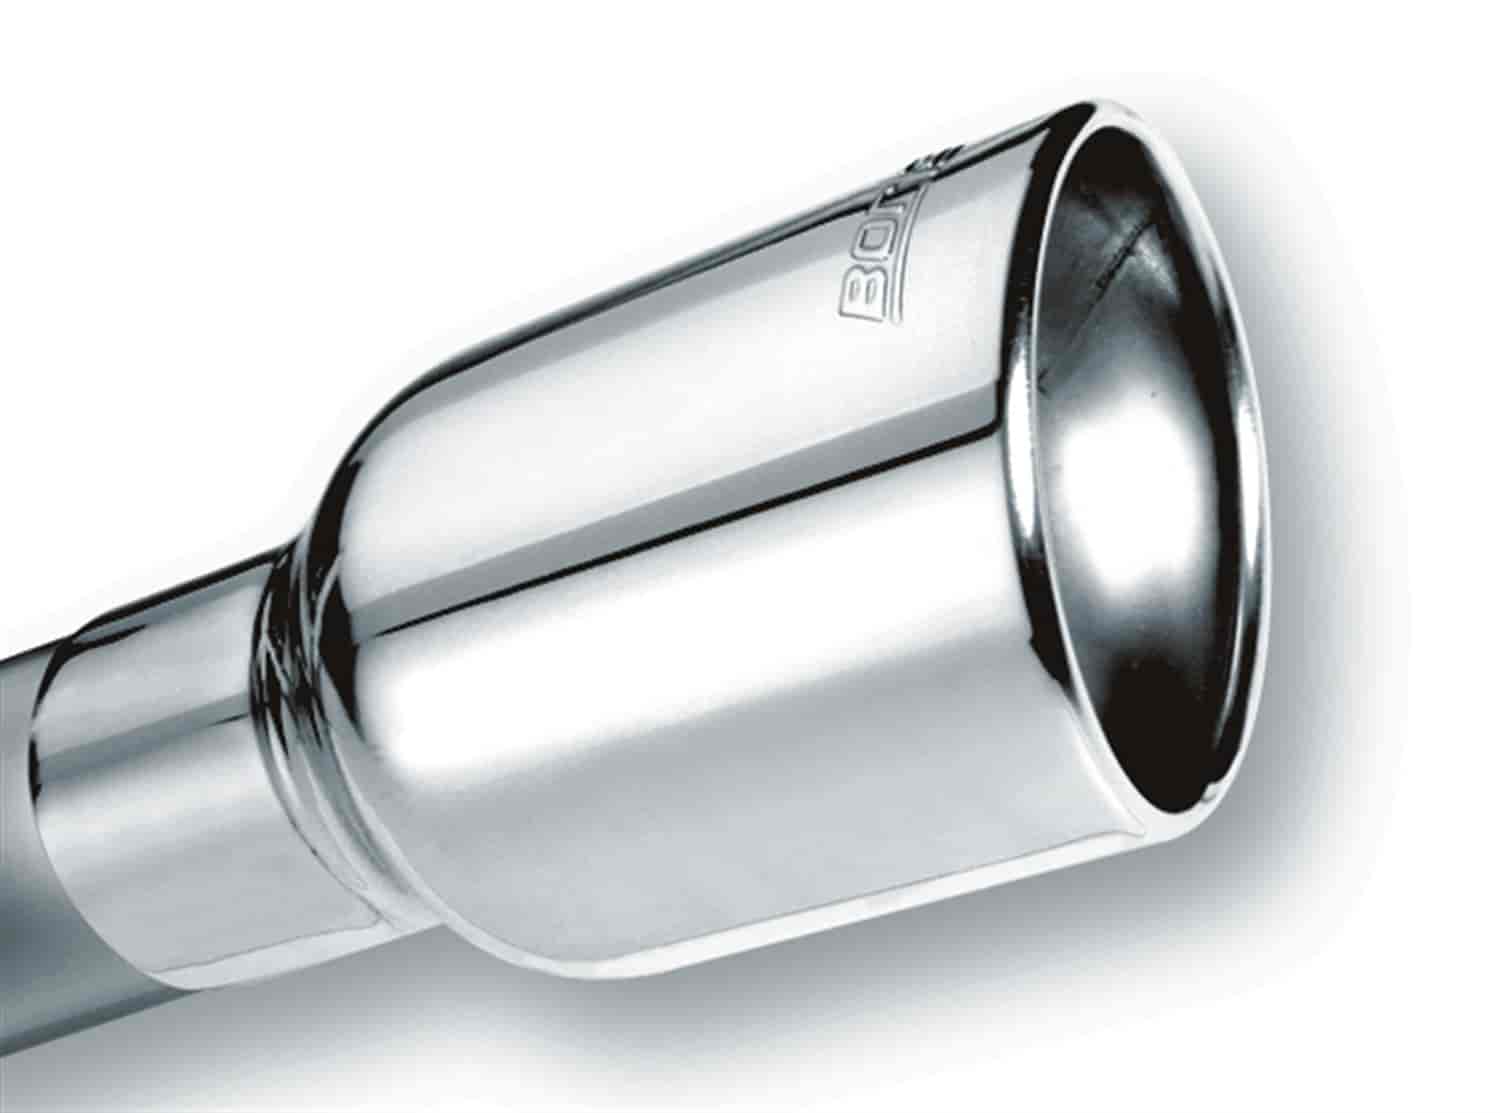 Stainless Steel Exhaust Tip Outlet Size: 4-1/4" x 3-1/2"